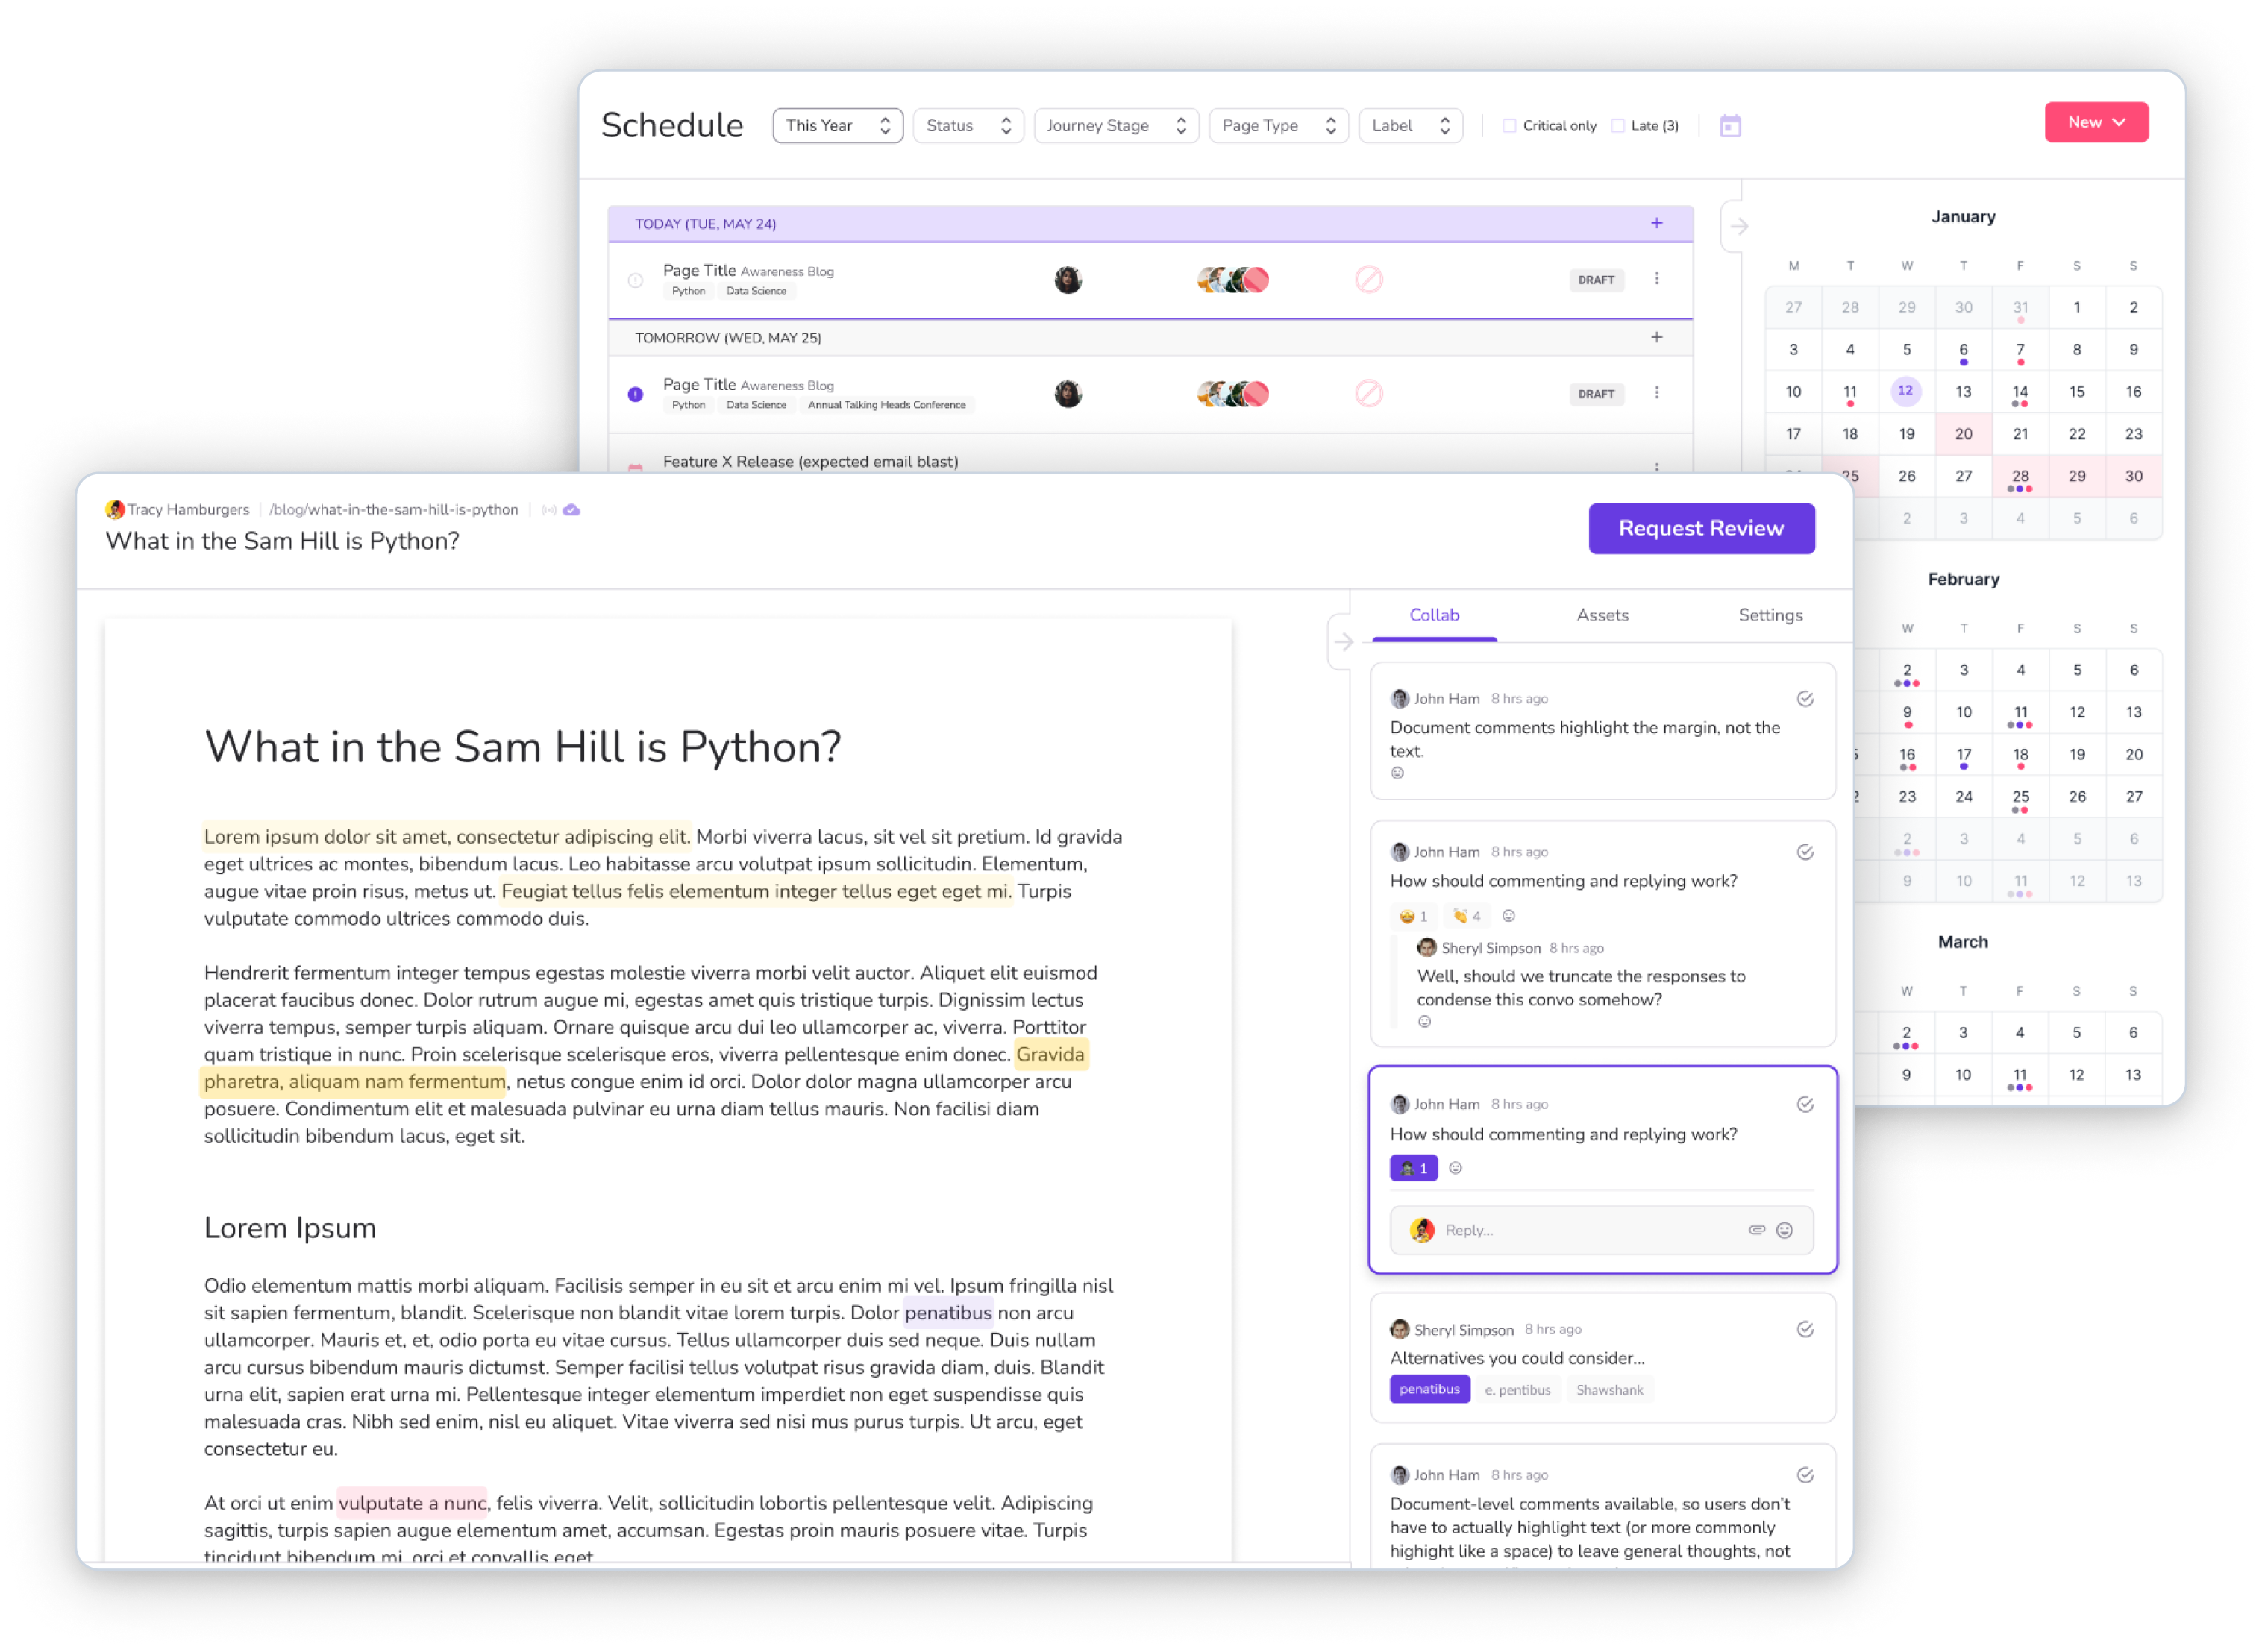 The power of a google docs style collaboration experience integrated into the marketing workflow to streamline operations. 